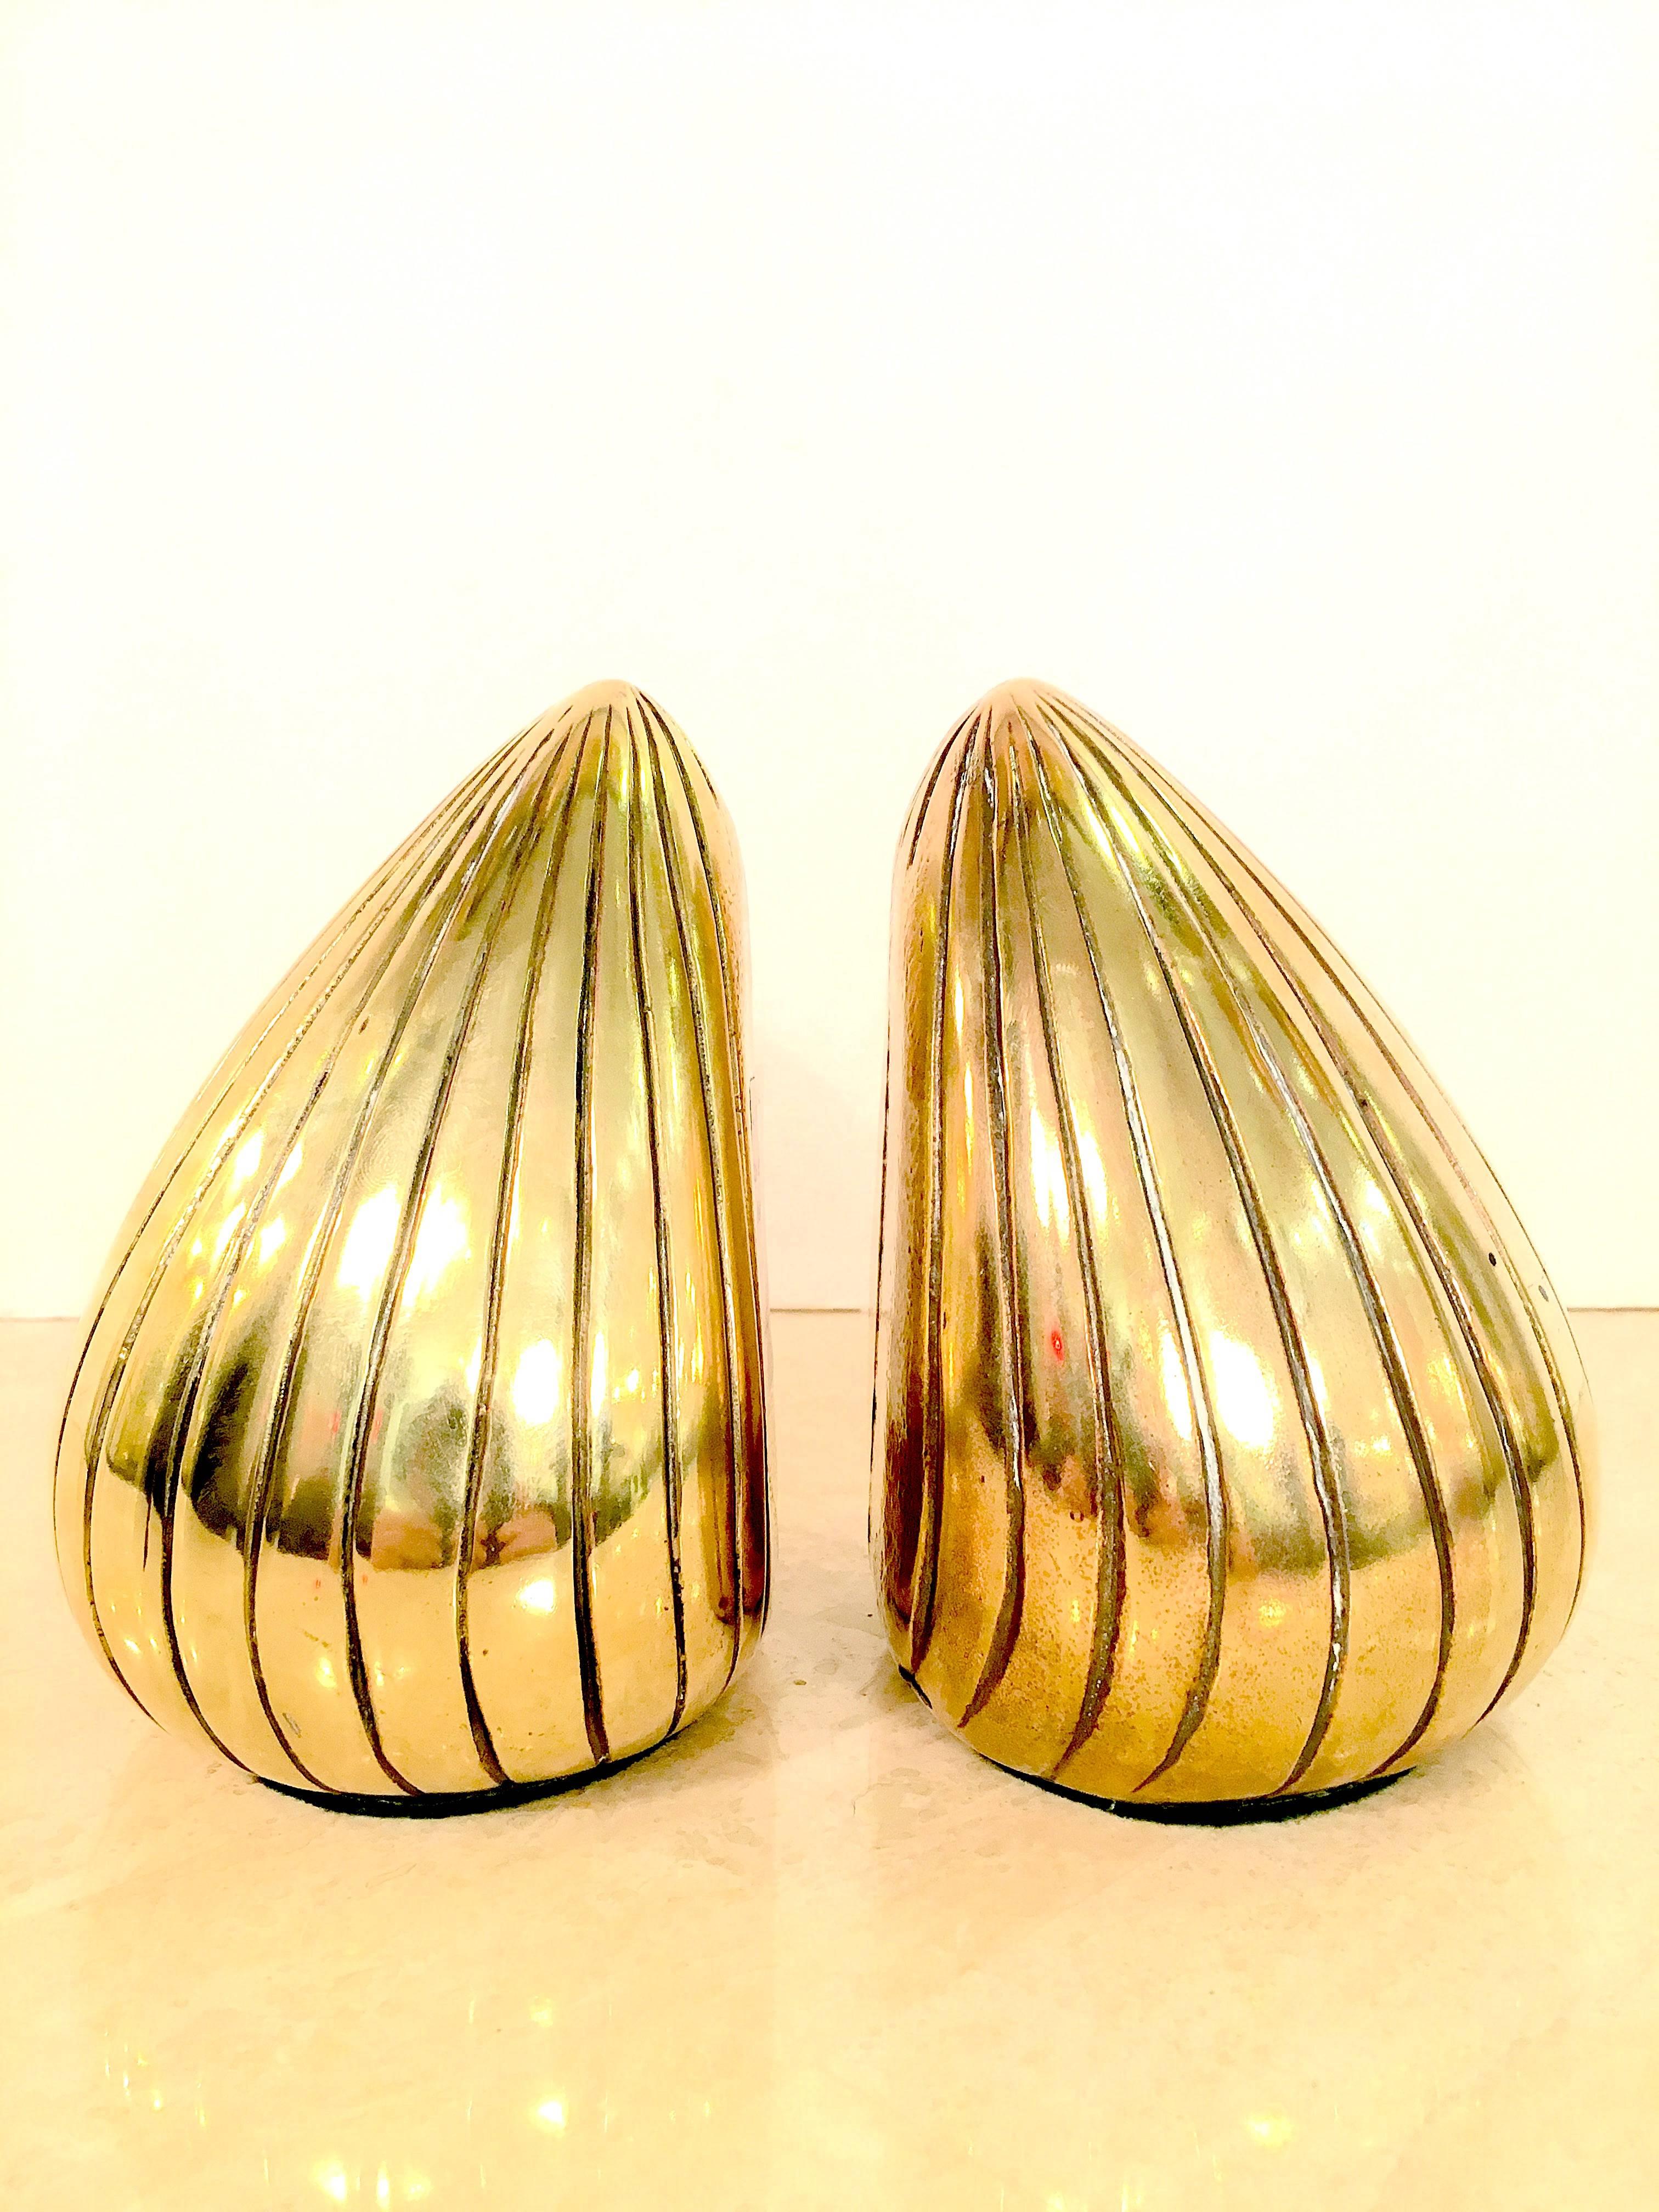 Iconic pair of sculptural brass bookends by Ben Seibel for Jenfred-Ware. Nicely polished to a bright shine. Please contact for location.